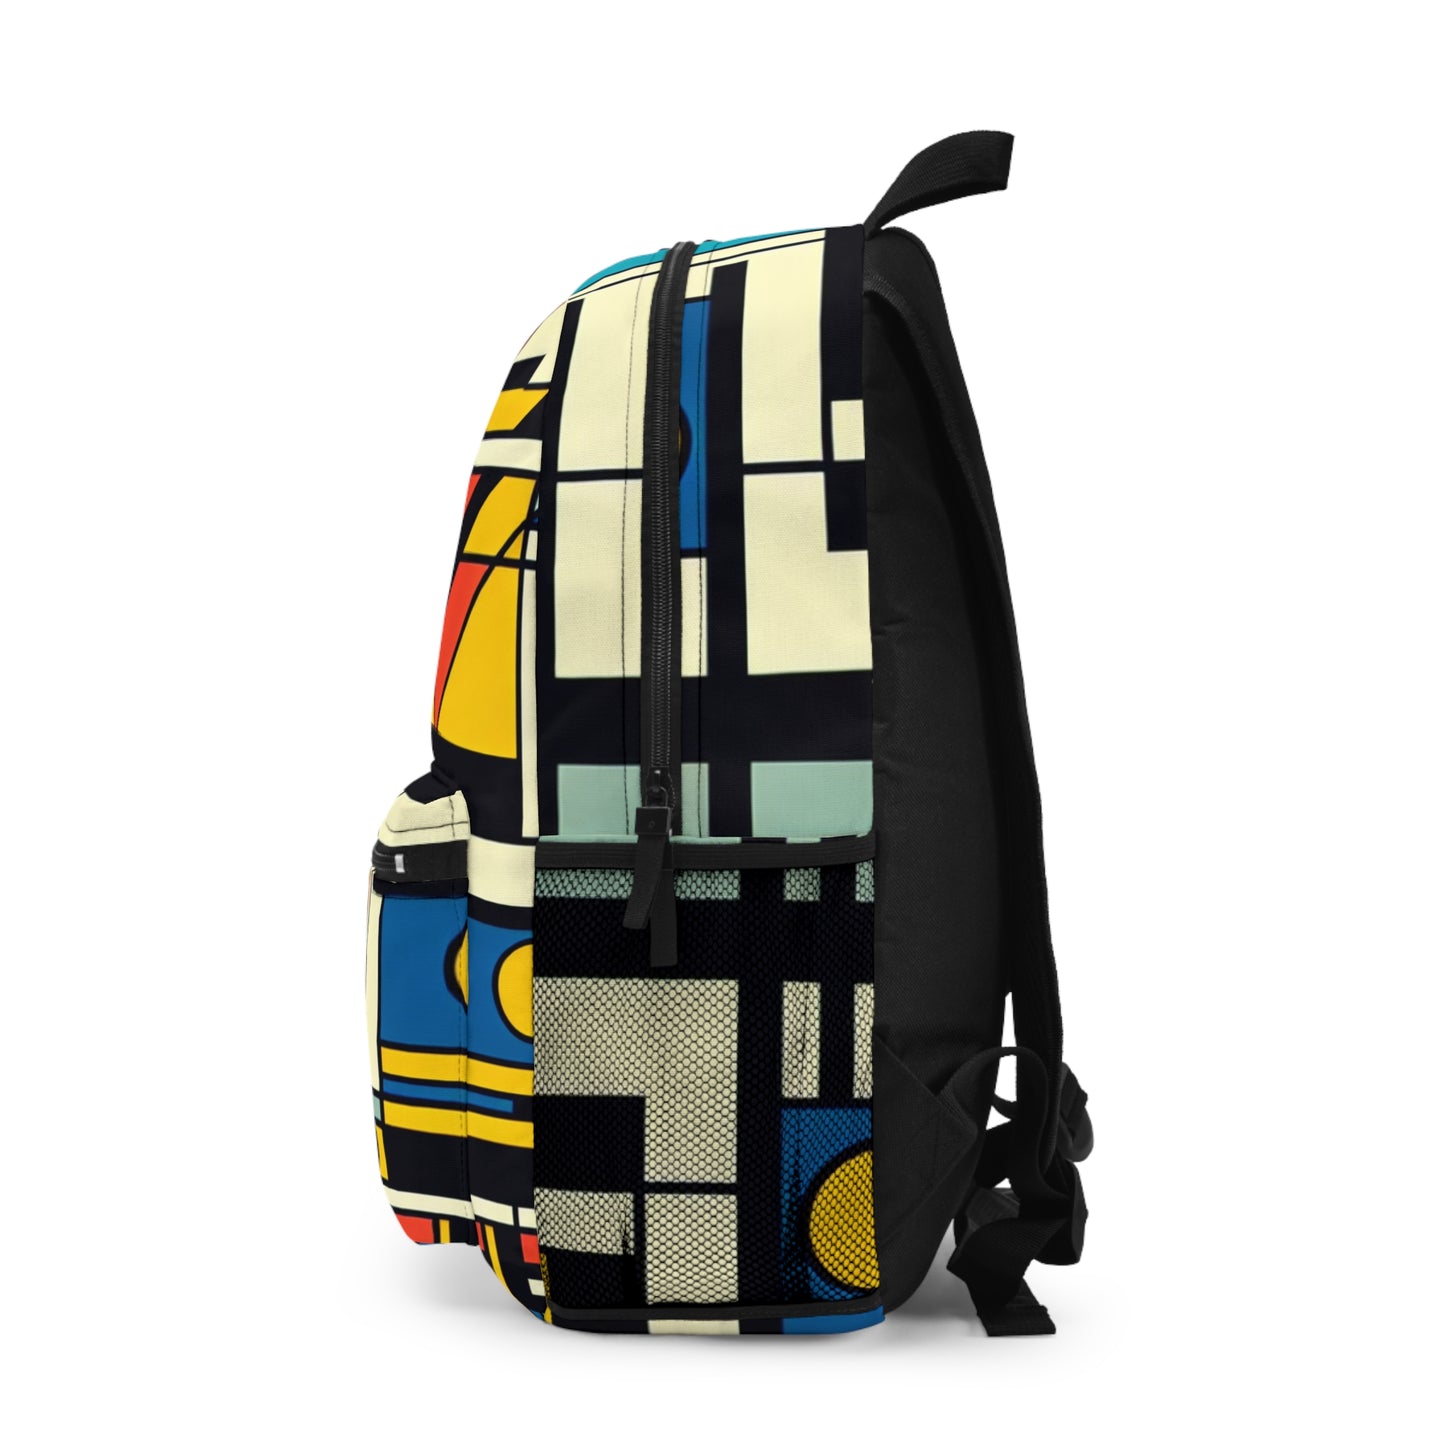 "Harmonious Balance: Neoplastic Exploration in Black, White, and Primary Colors" - The Alien Backpack Neoplasticism